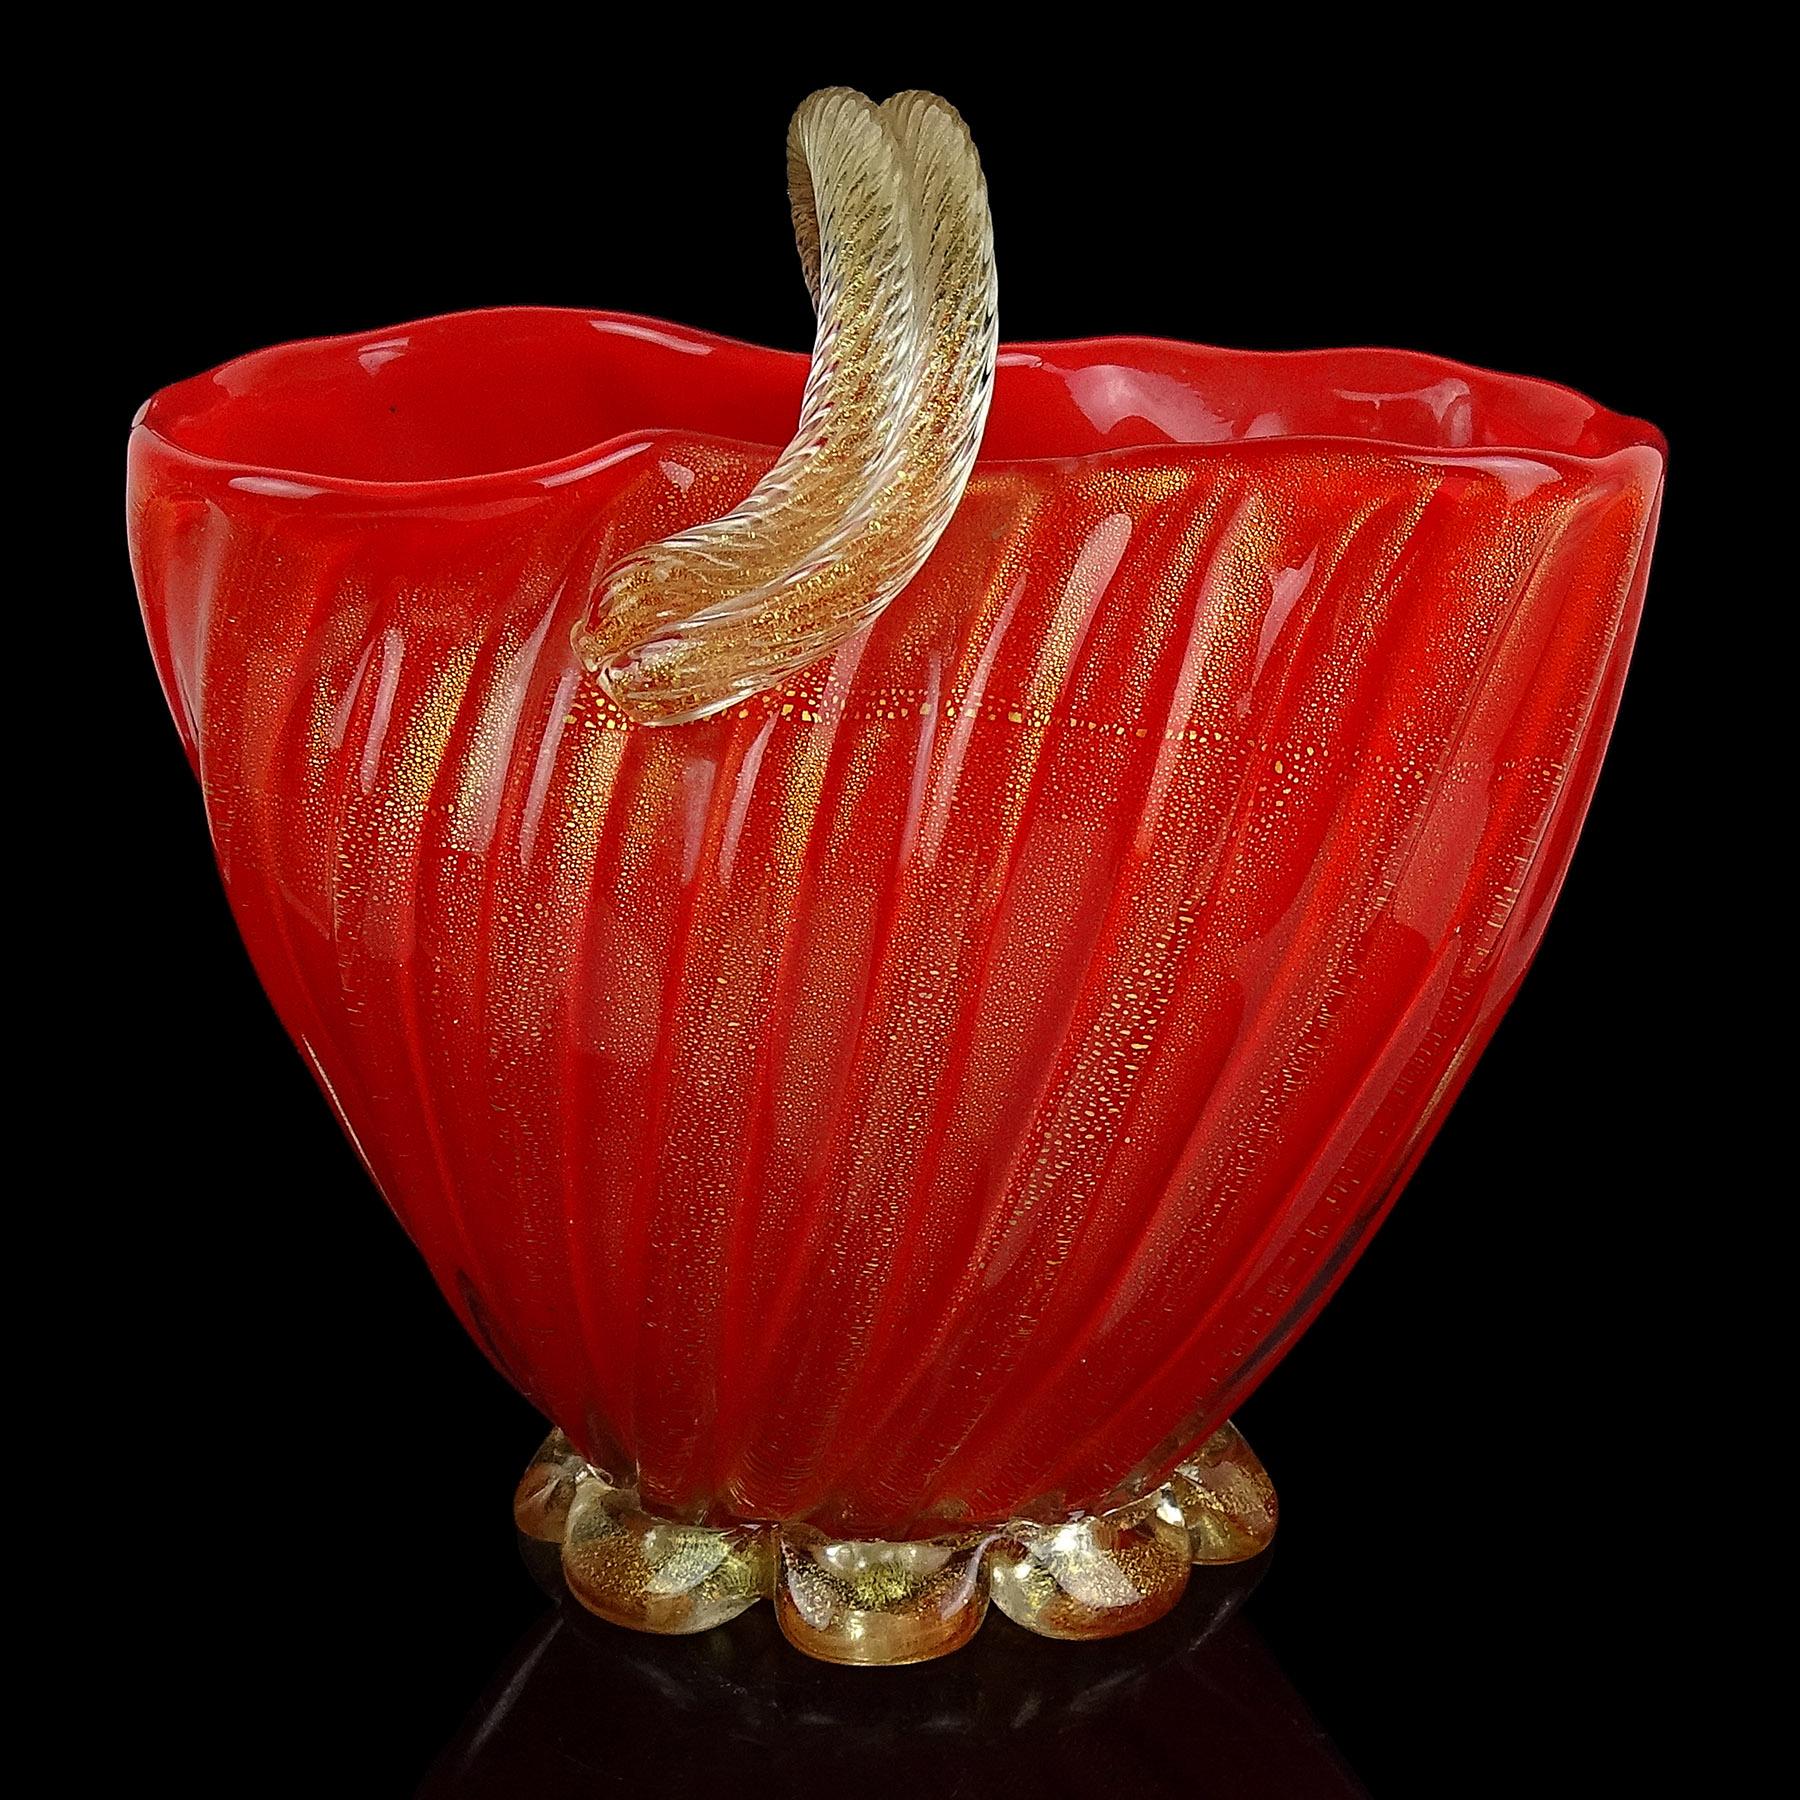 Rare and beautiful, large vintage Murano hand blown coral red and gold flecks Italian art glass flower basket / vase. Documented to designer Archimede Seguso, circa 1952. A similar piece (in yellow) was photographed by me, and published in the